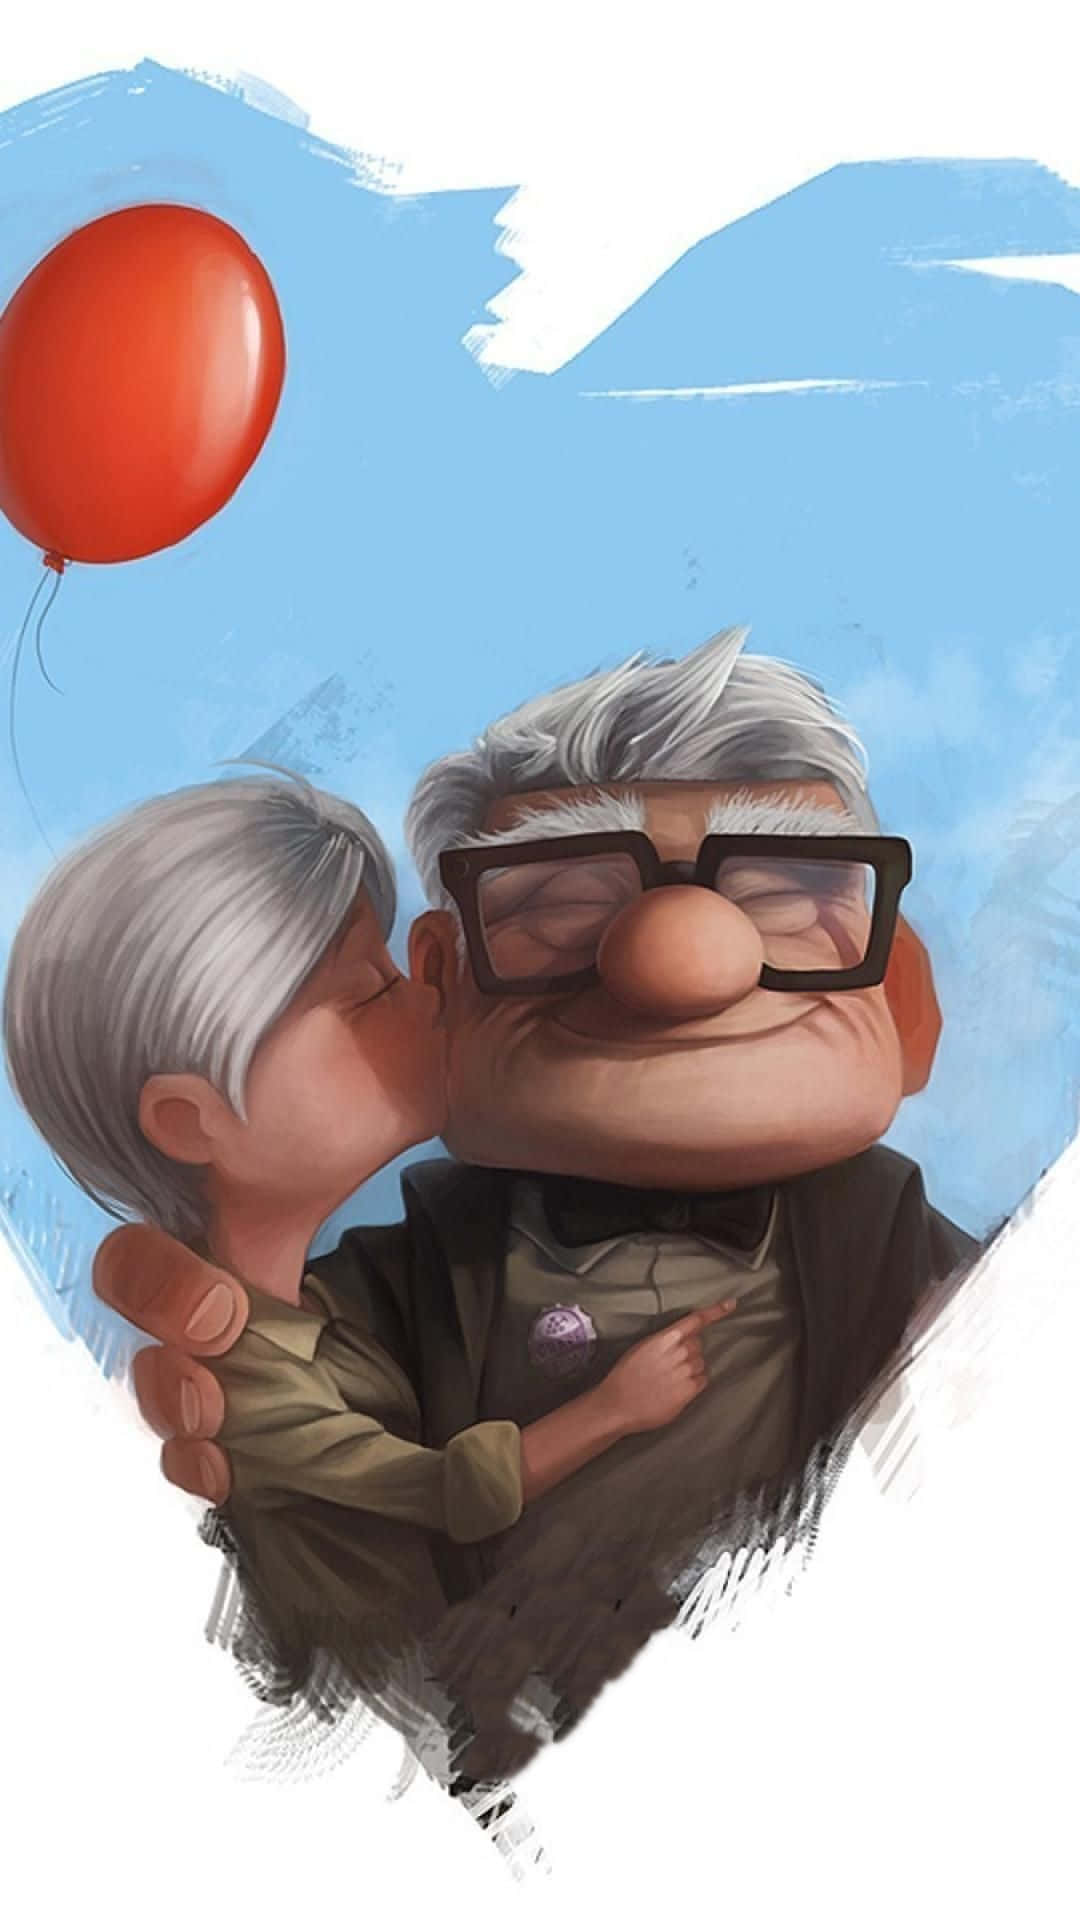 The adventurous journey of Carl and Russell from the iconic film, "Up." Wallpaper